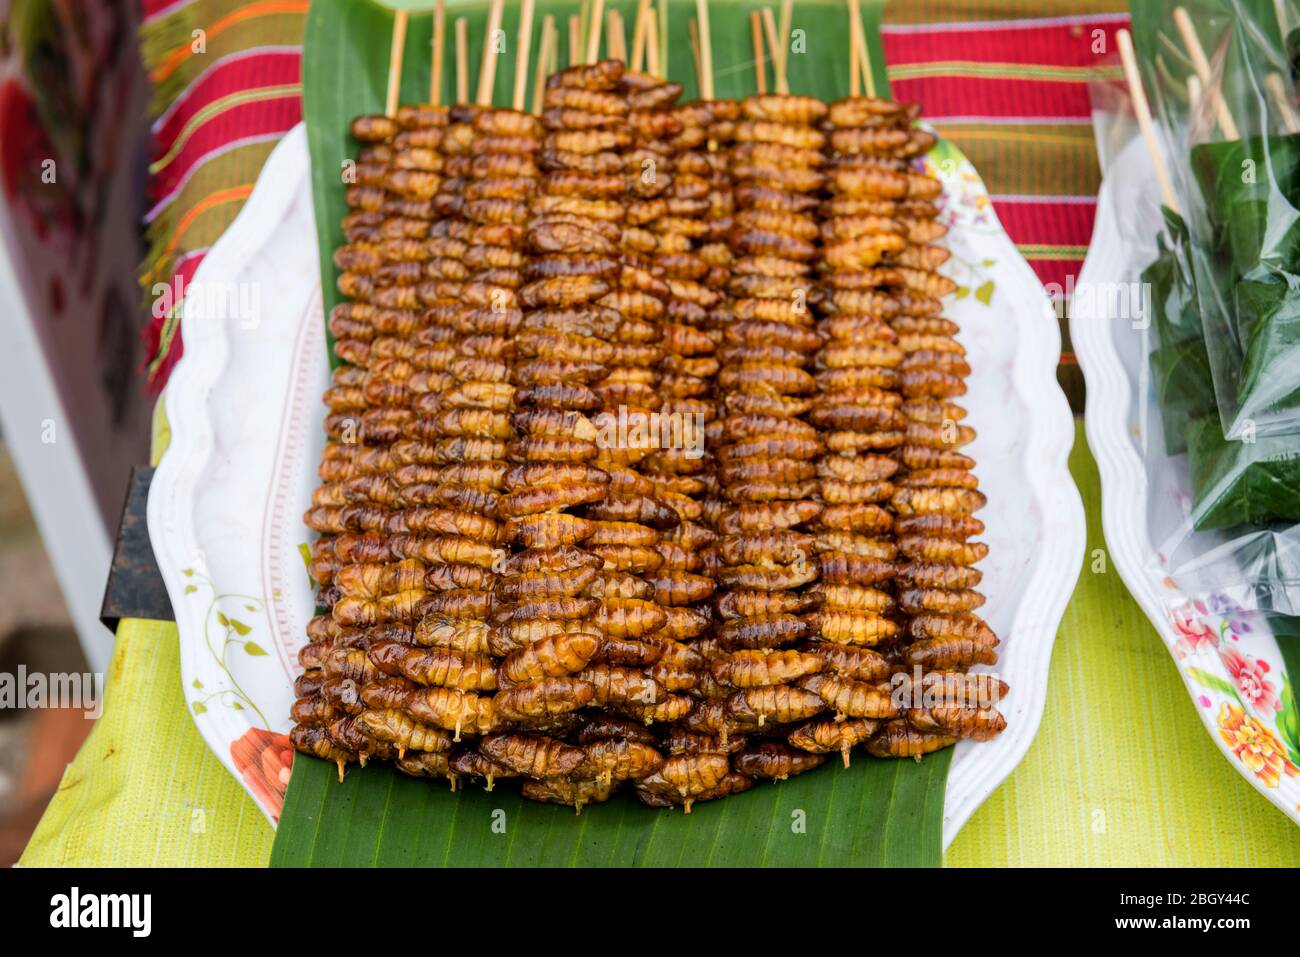 a lot of fried silkworm pupa sticks sell in street market in Thailand. Insects are high protein foods. Stock Photo